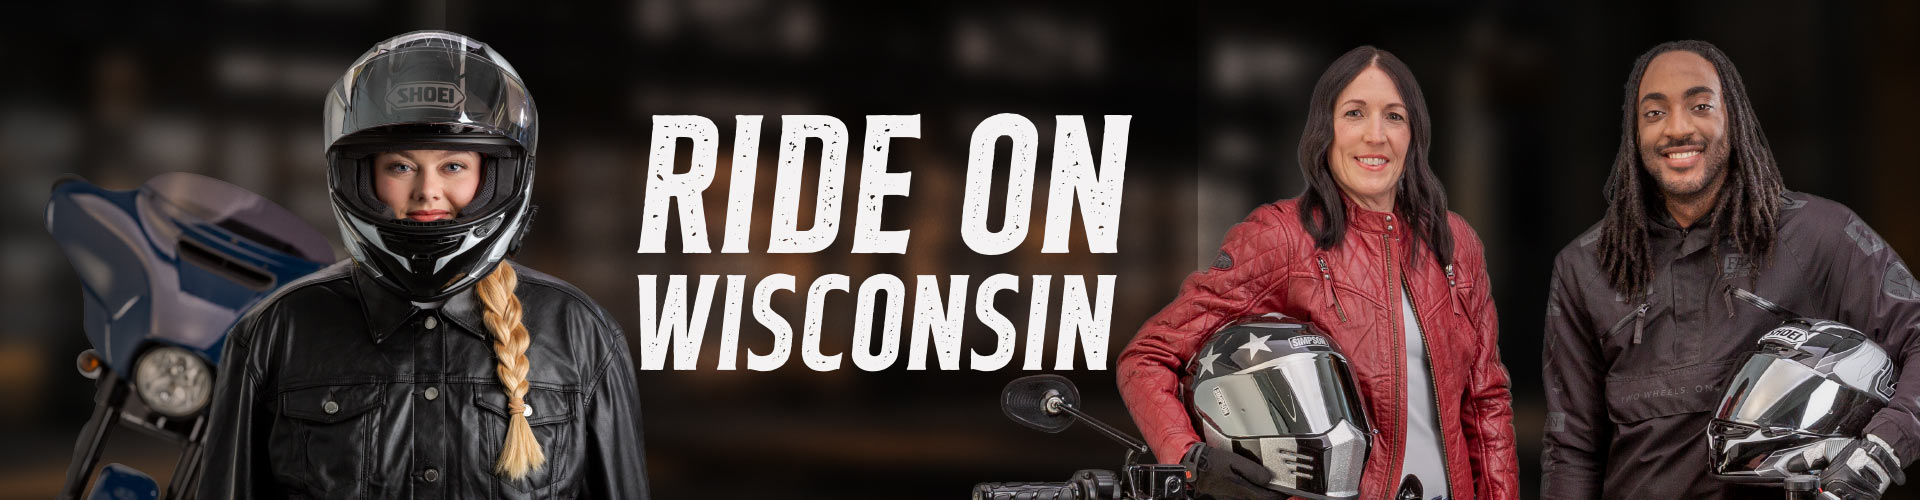 Ride on Wisconsin